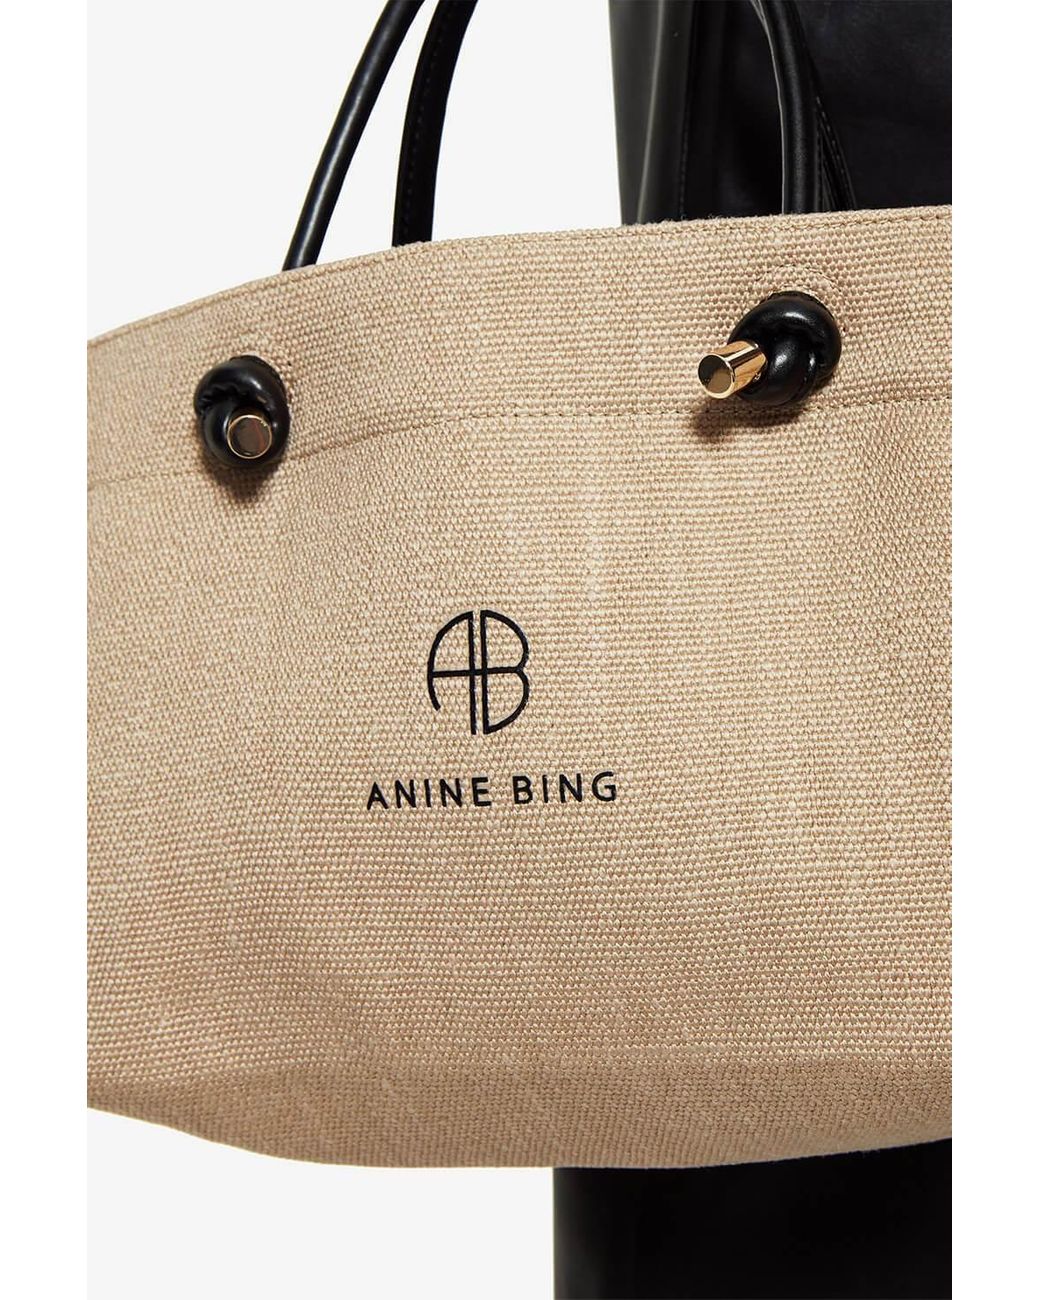 Anine Bing Leather-Trimmed Large Saffron Tote - Neutrals Totes, Handbags -  W6O30754